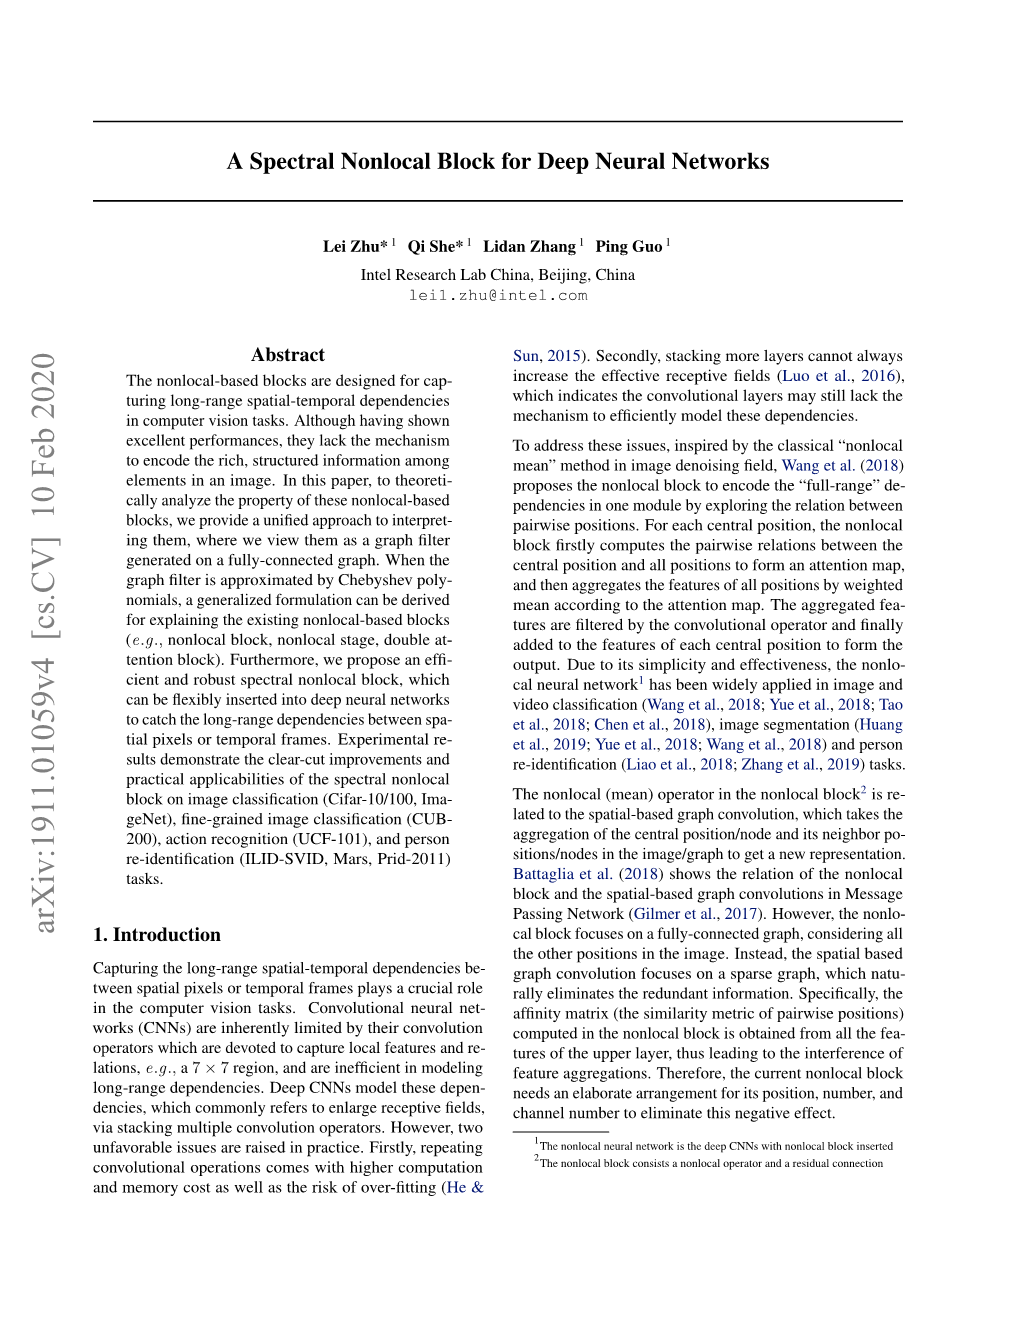 A Spectral Nonlocal Block for Deep Neural Networks